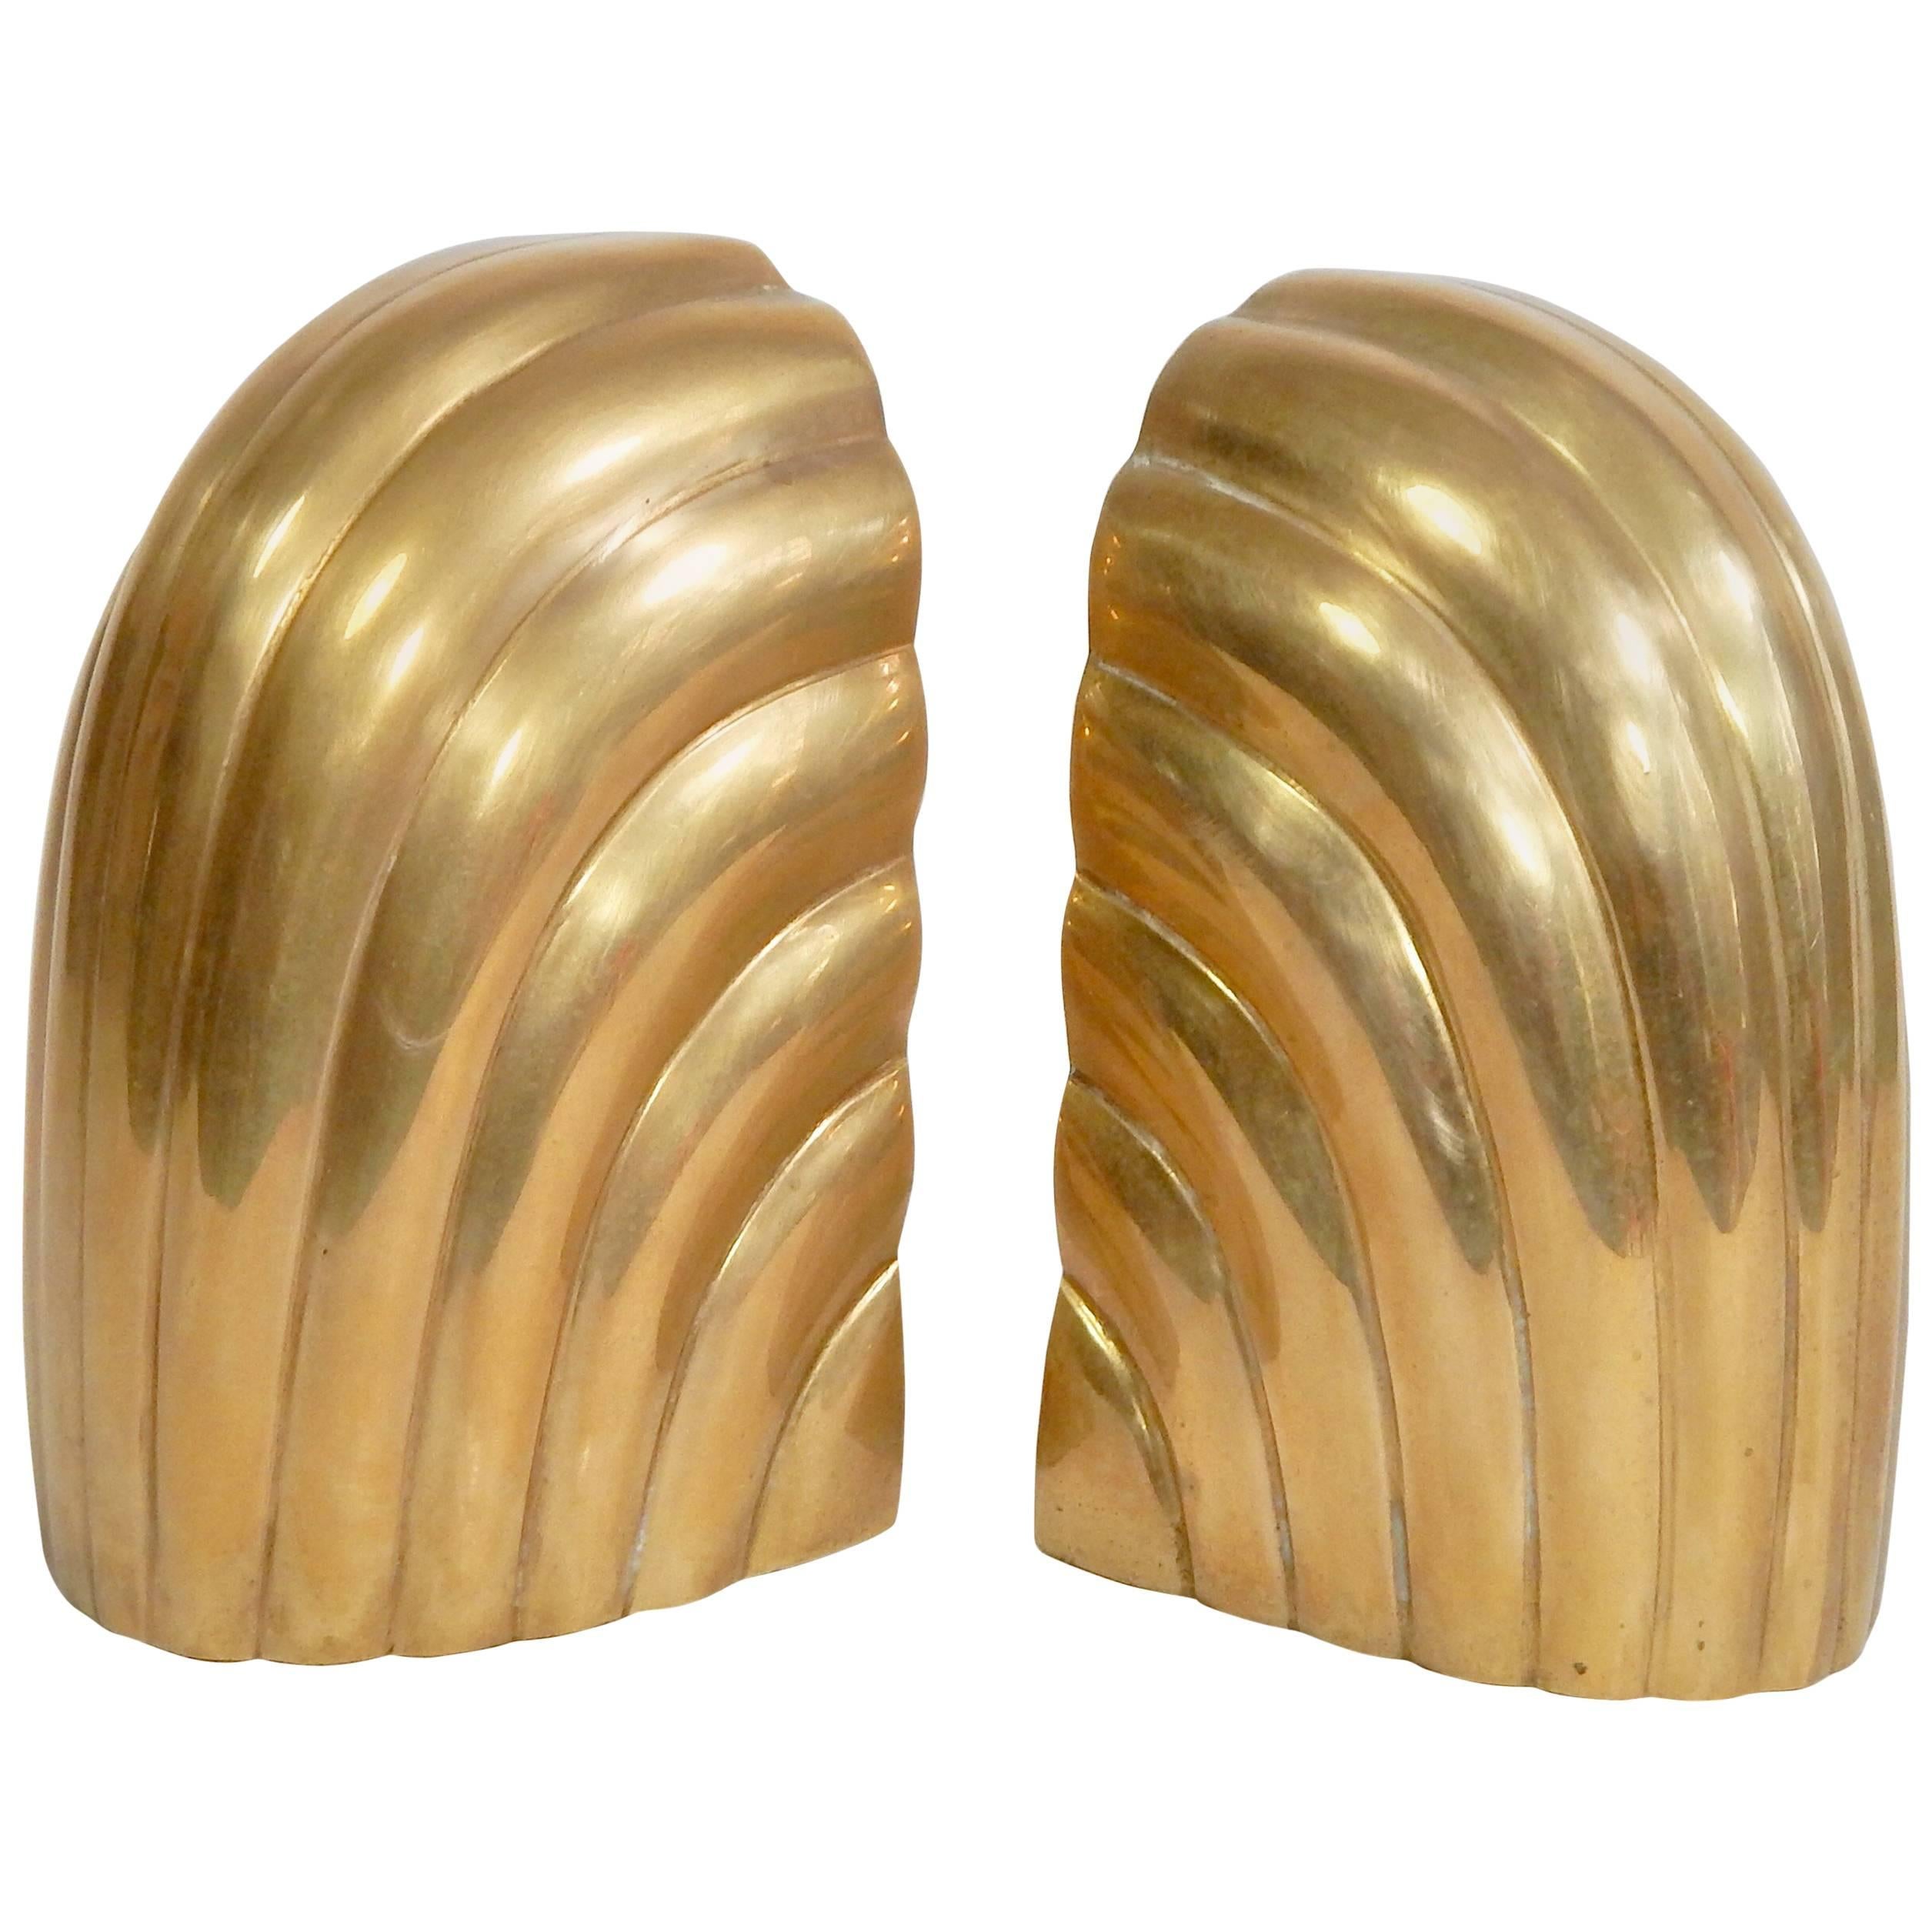 Pair of Solid Brass Bookends